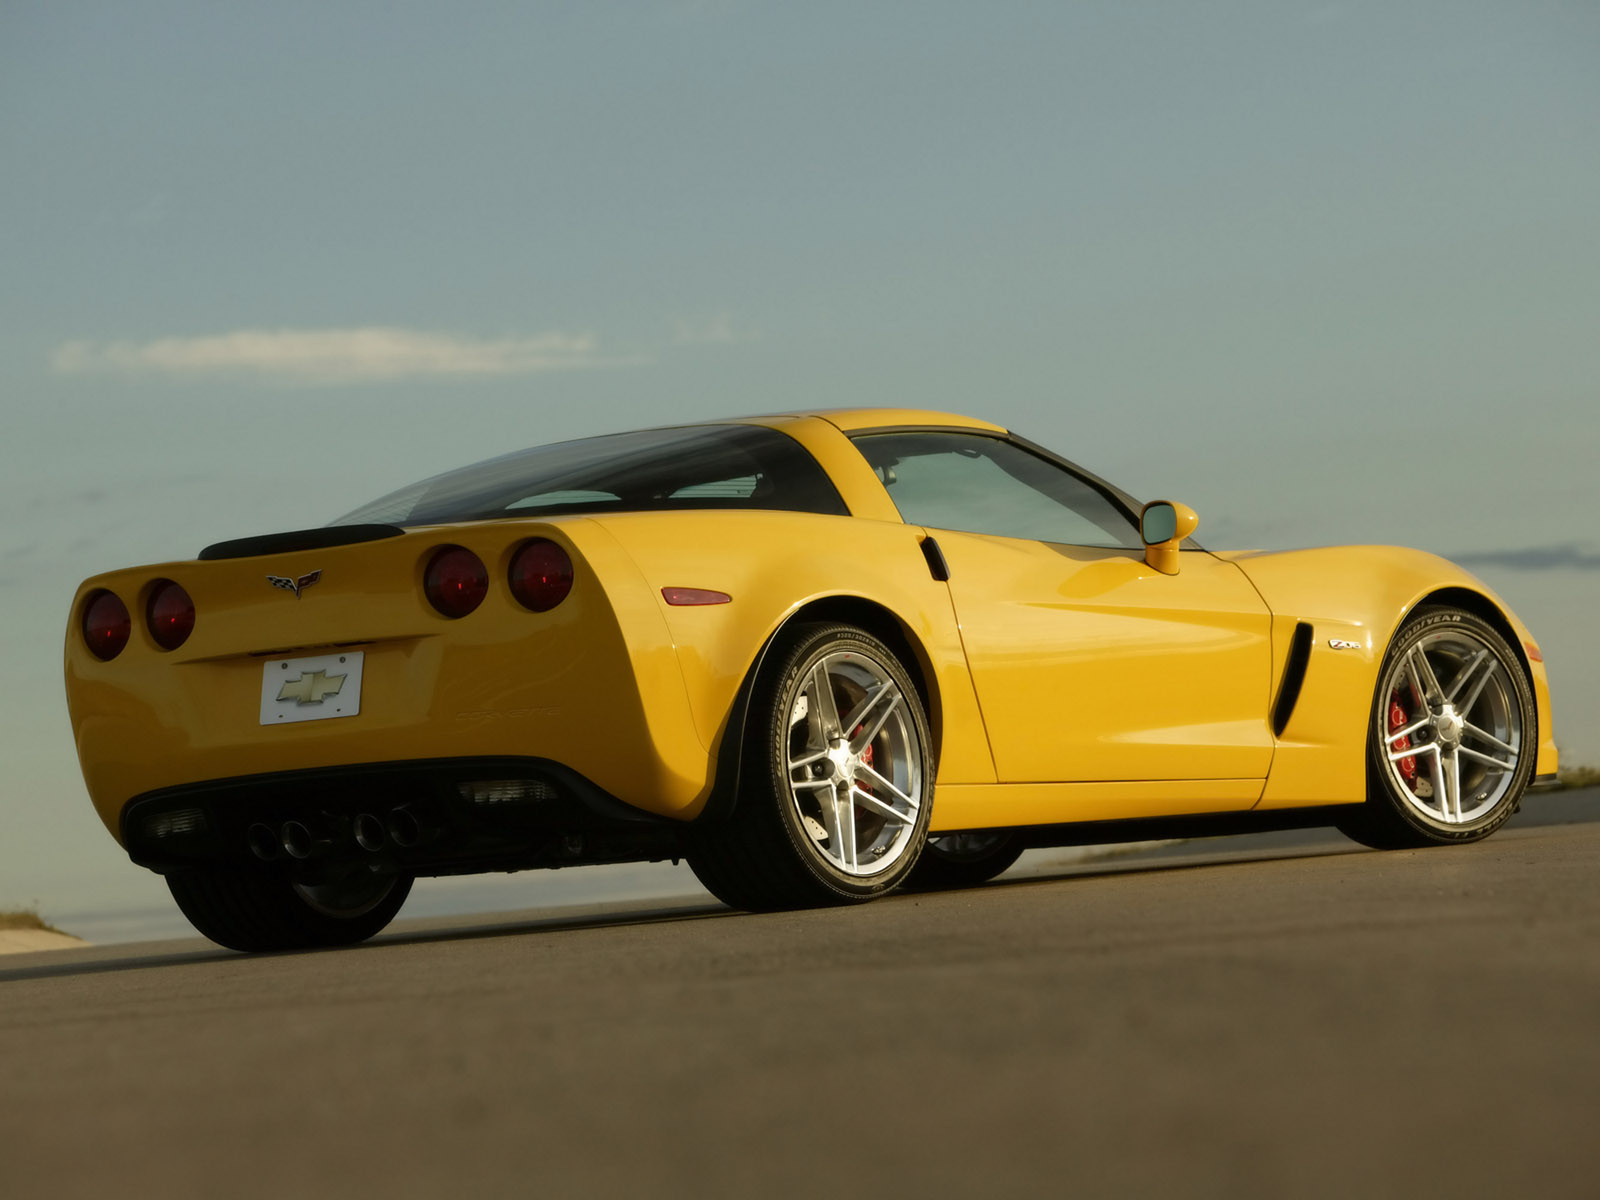 Looking for 2006 Chevrolet Corvette pictures?